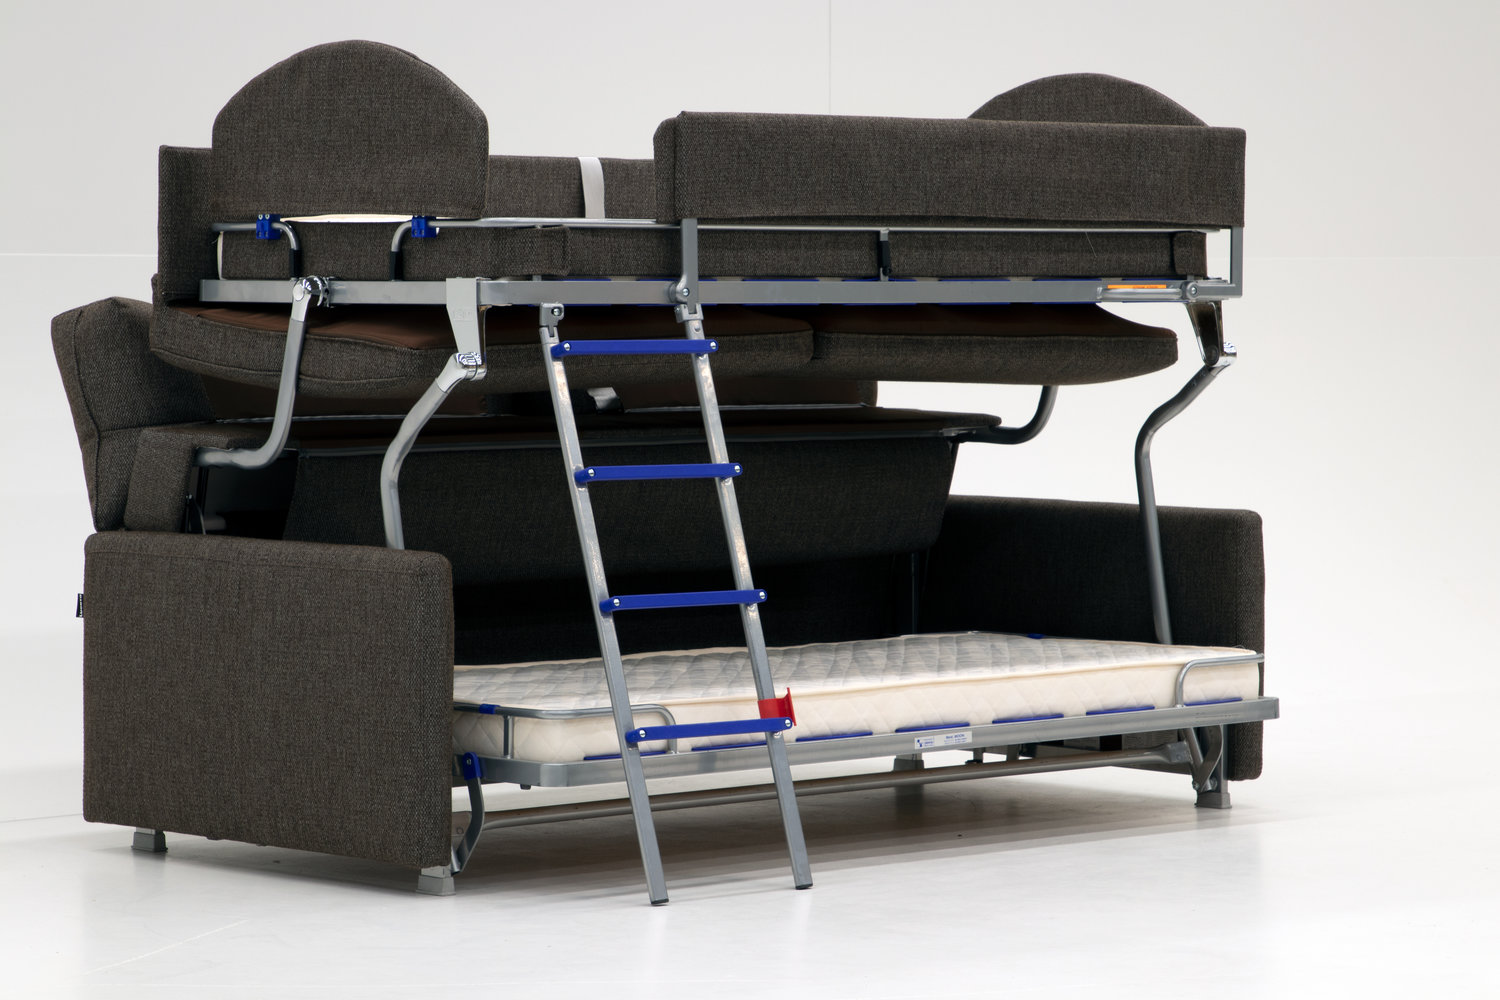 Elevate Bunk Sofa Bed M Collection Home, Futon Sofa Bunk Bed